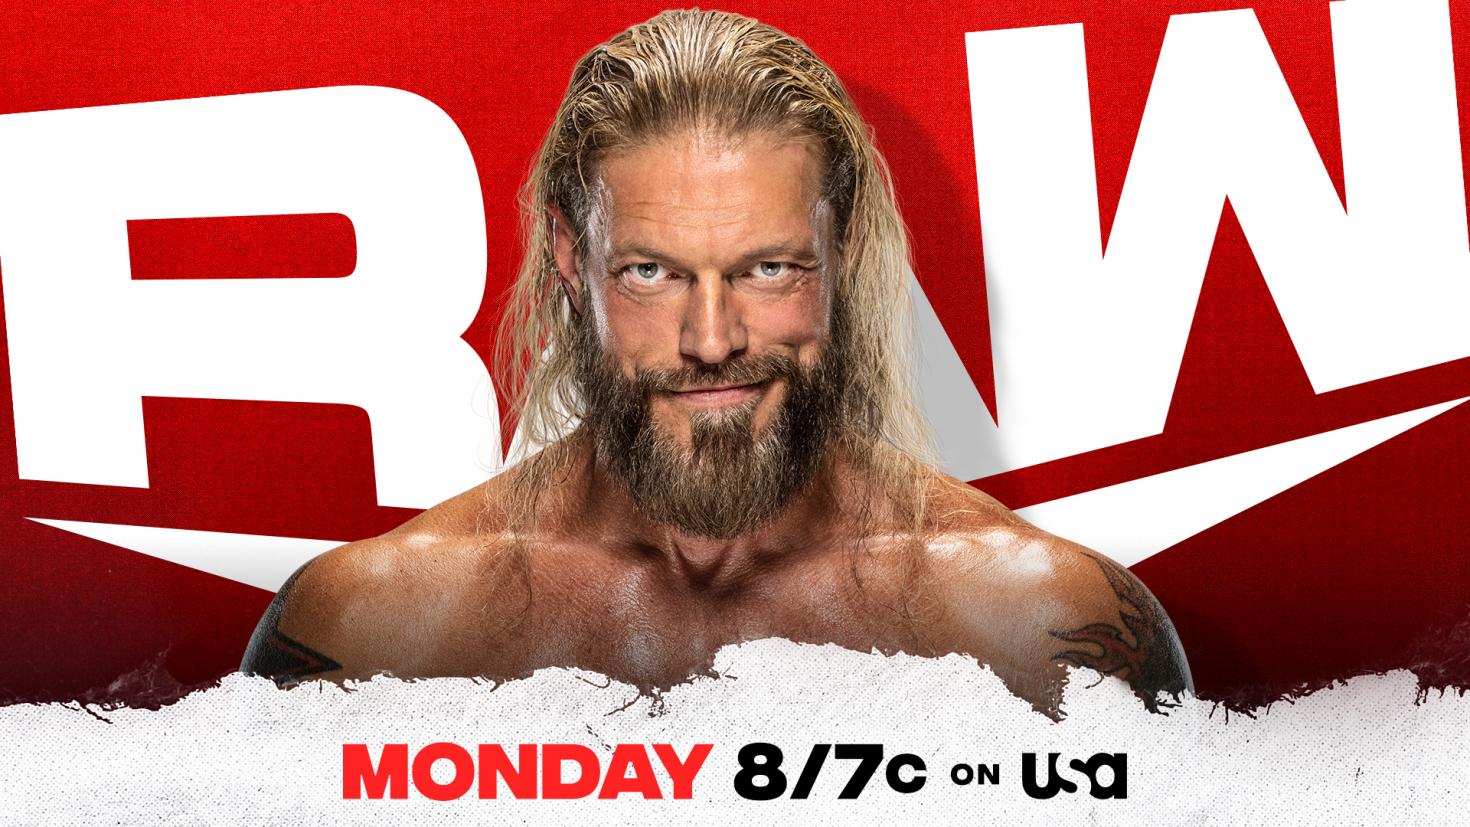 WWE Raw Live: Edge’s return and two main-event level matches announced for next week’s Raw, check Preview